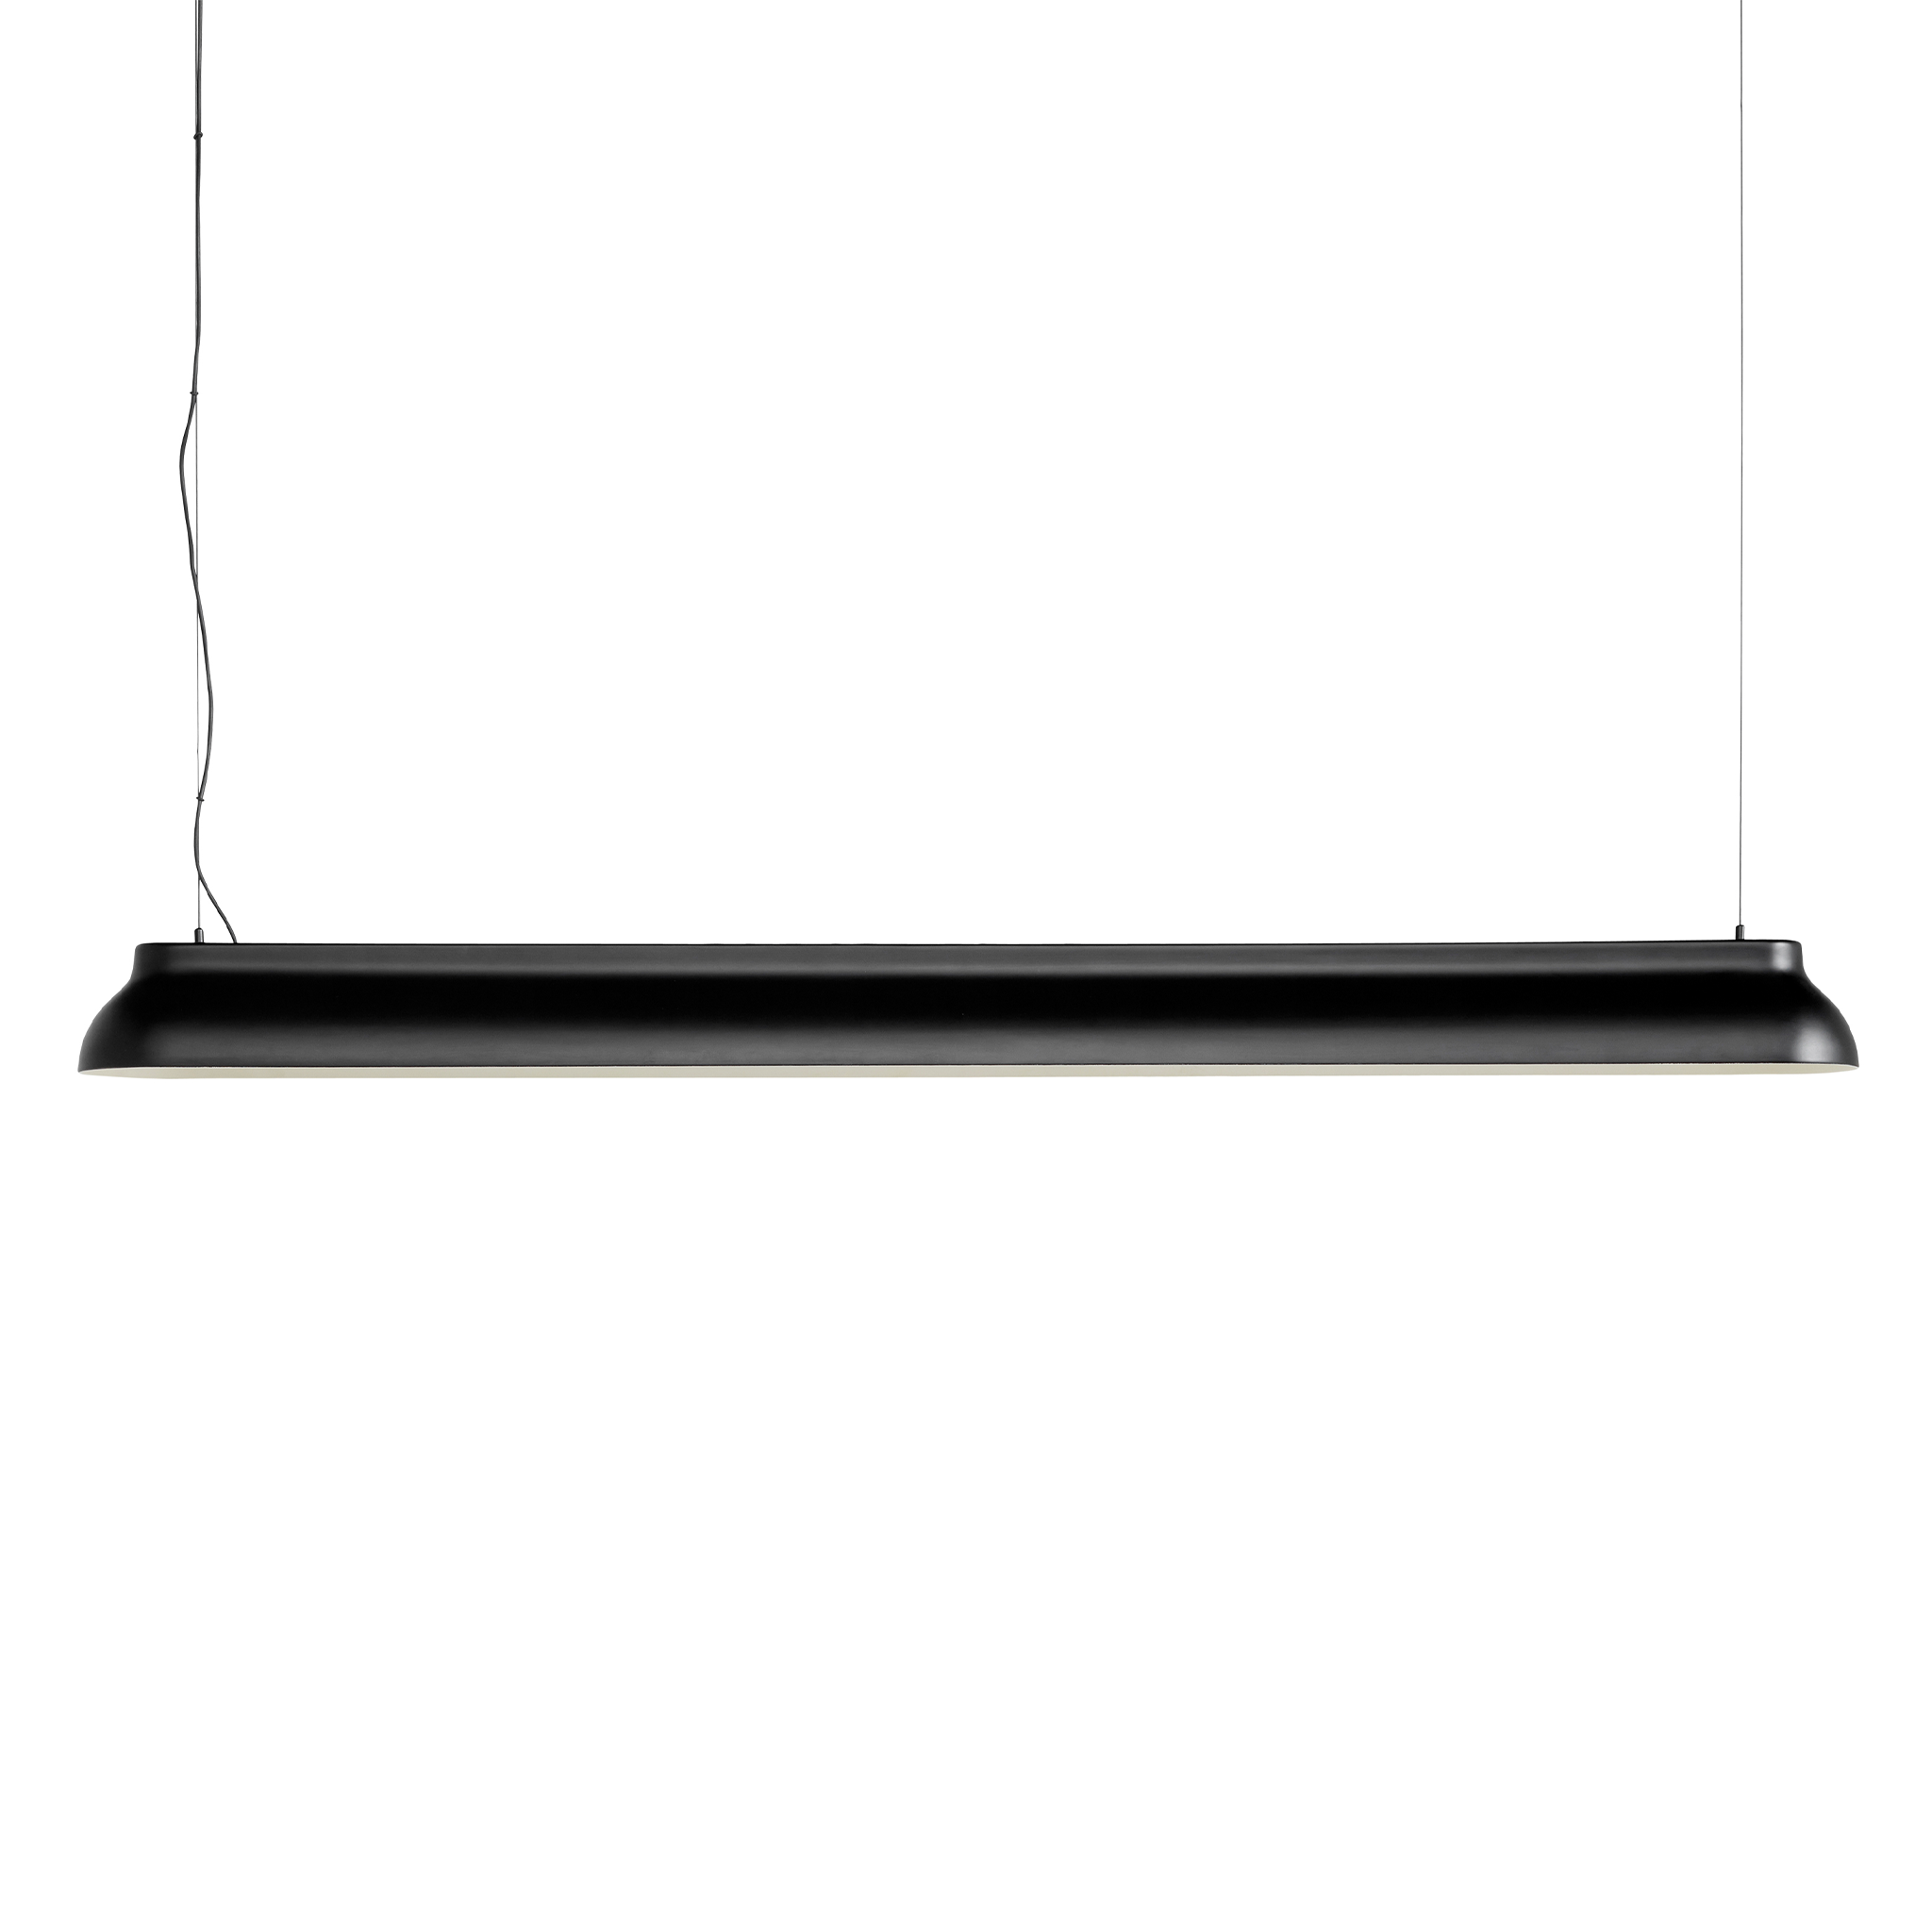 PC Linear Light by Pierre Charpin for Hay